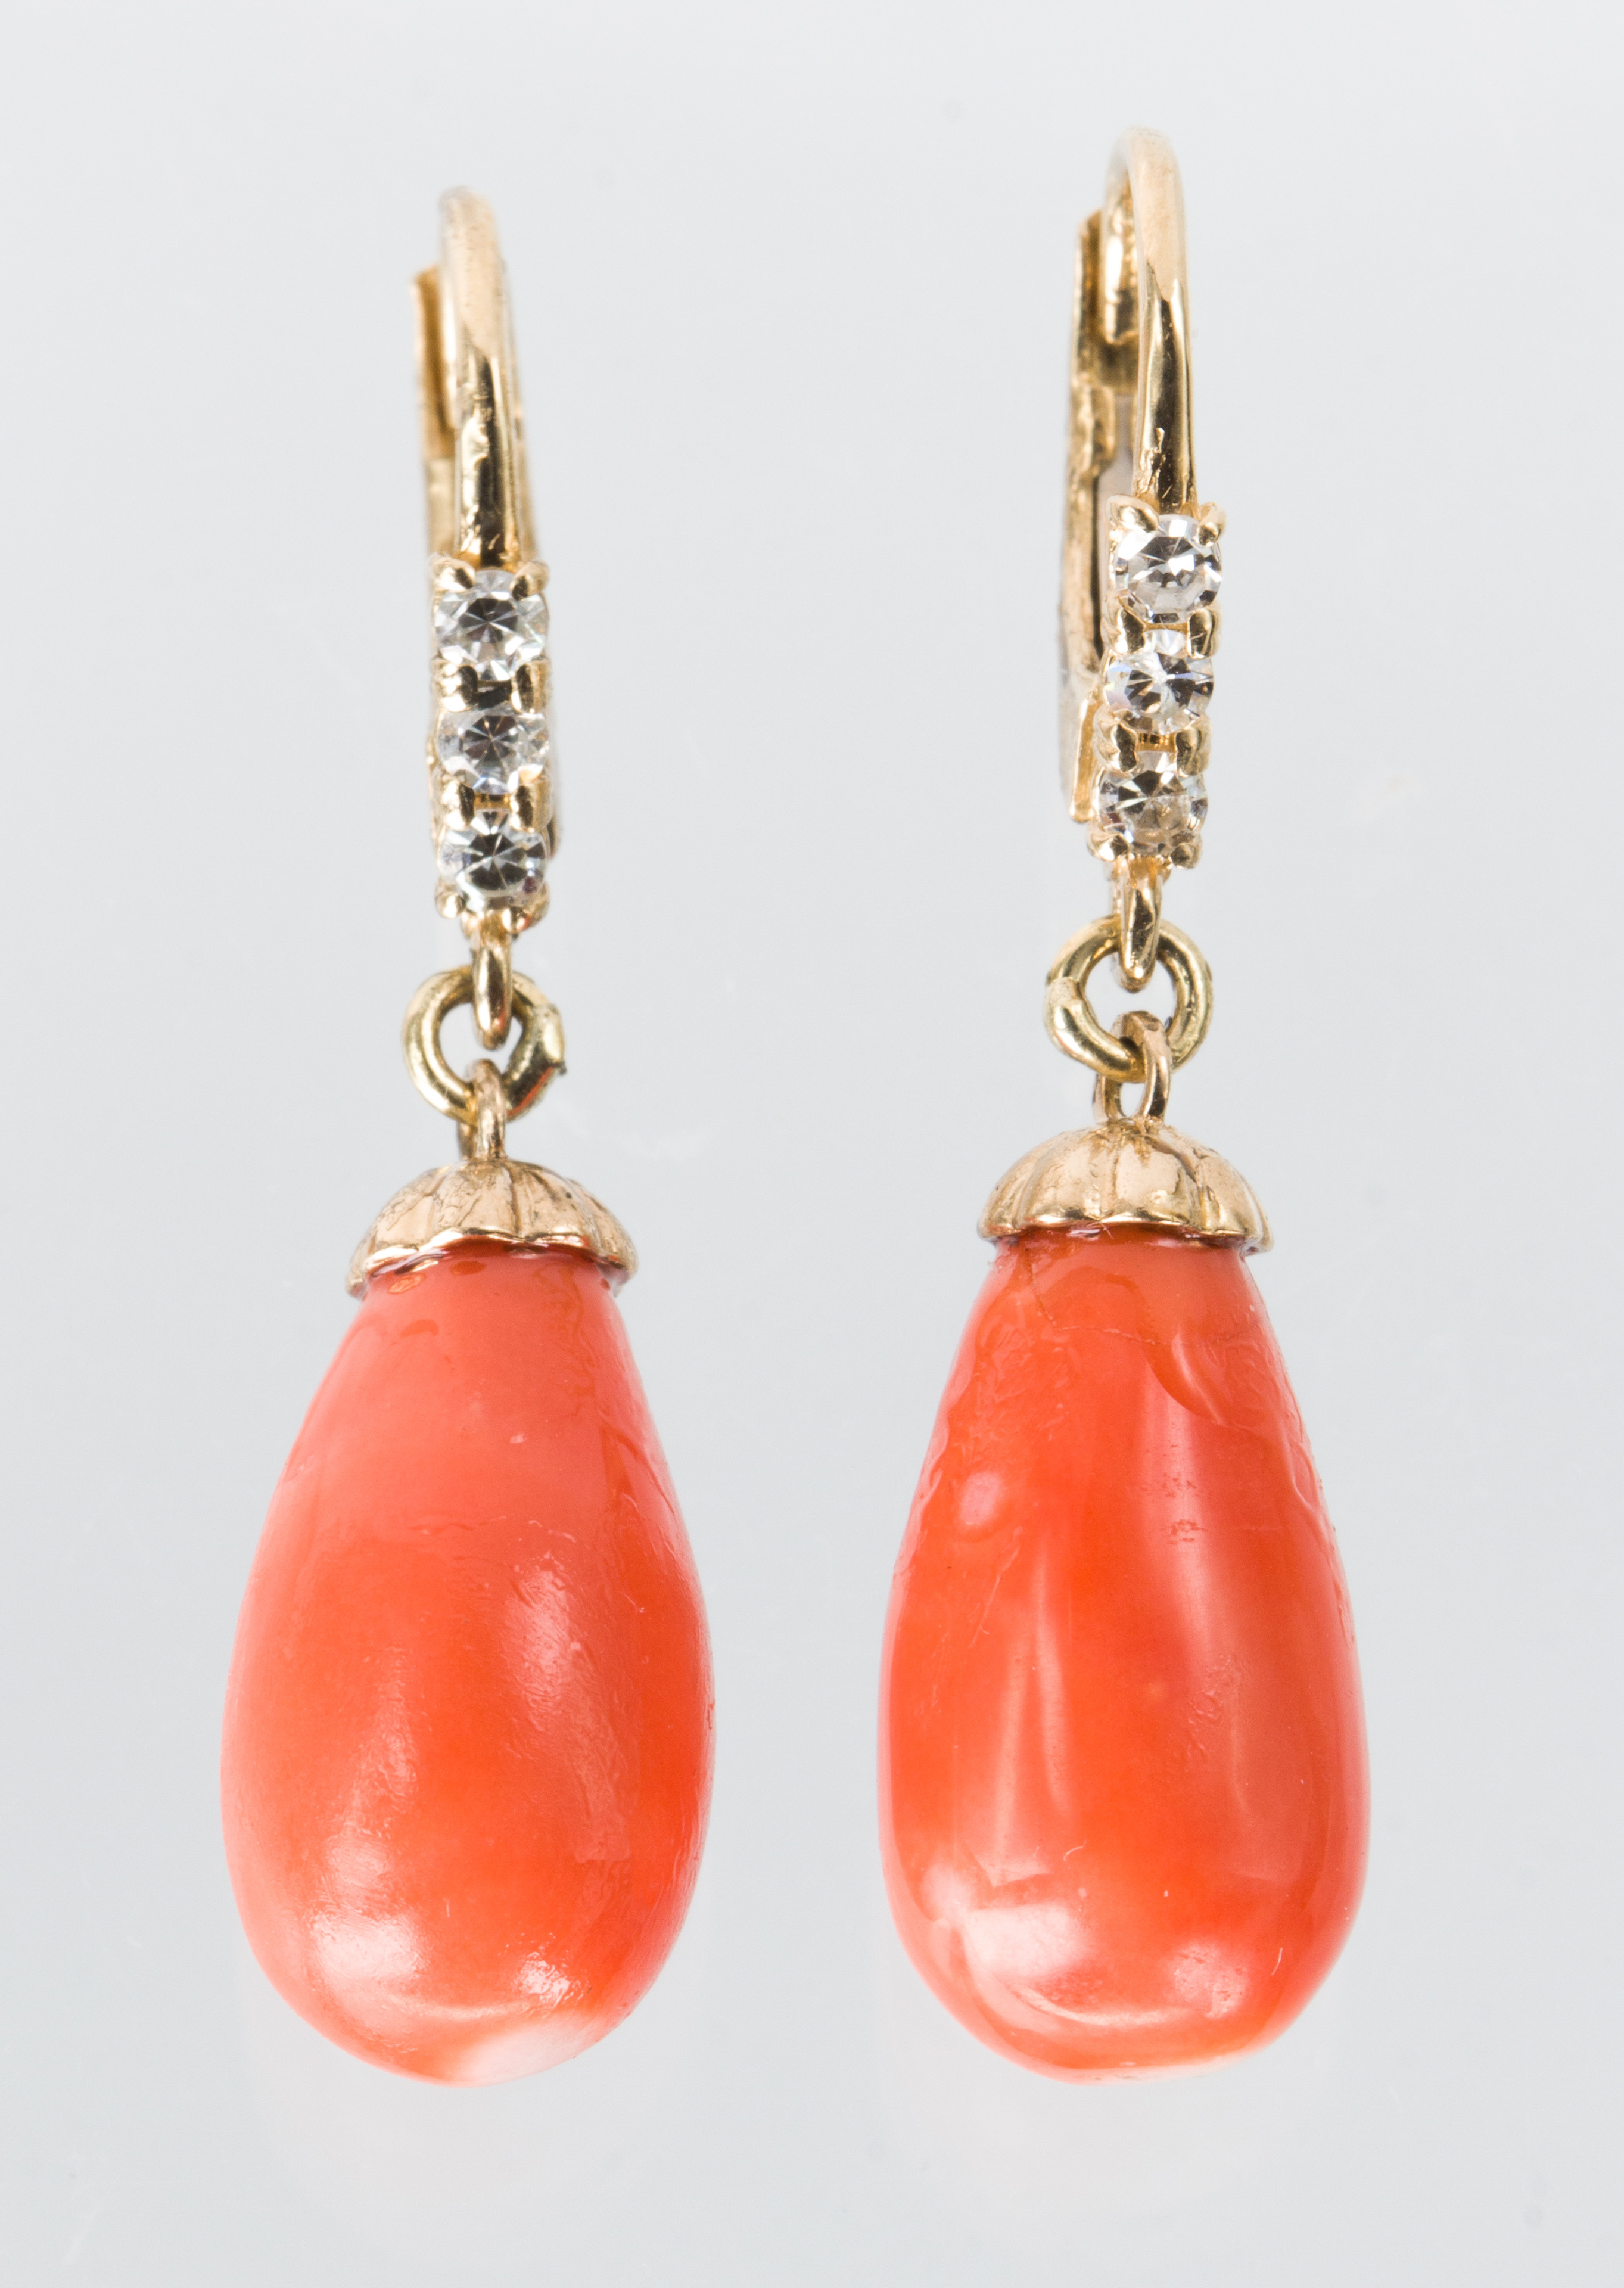 Coral, diamond, 14k yellow gold jewelry suite - Image 2 of 3